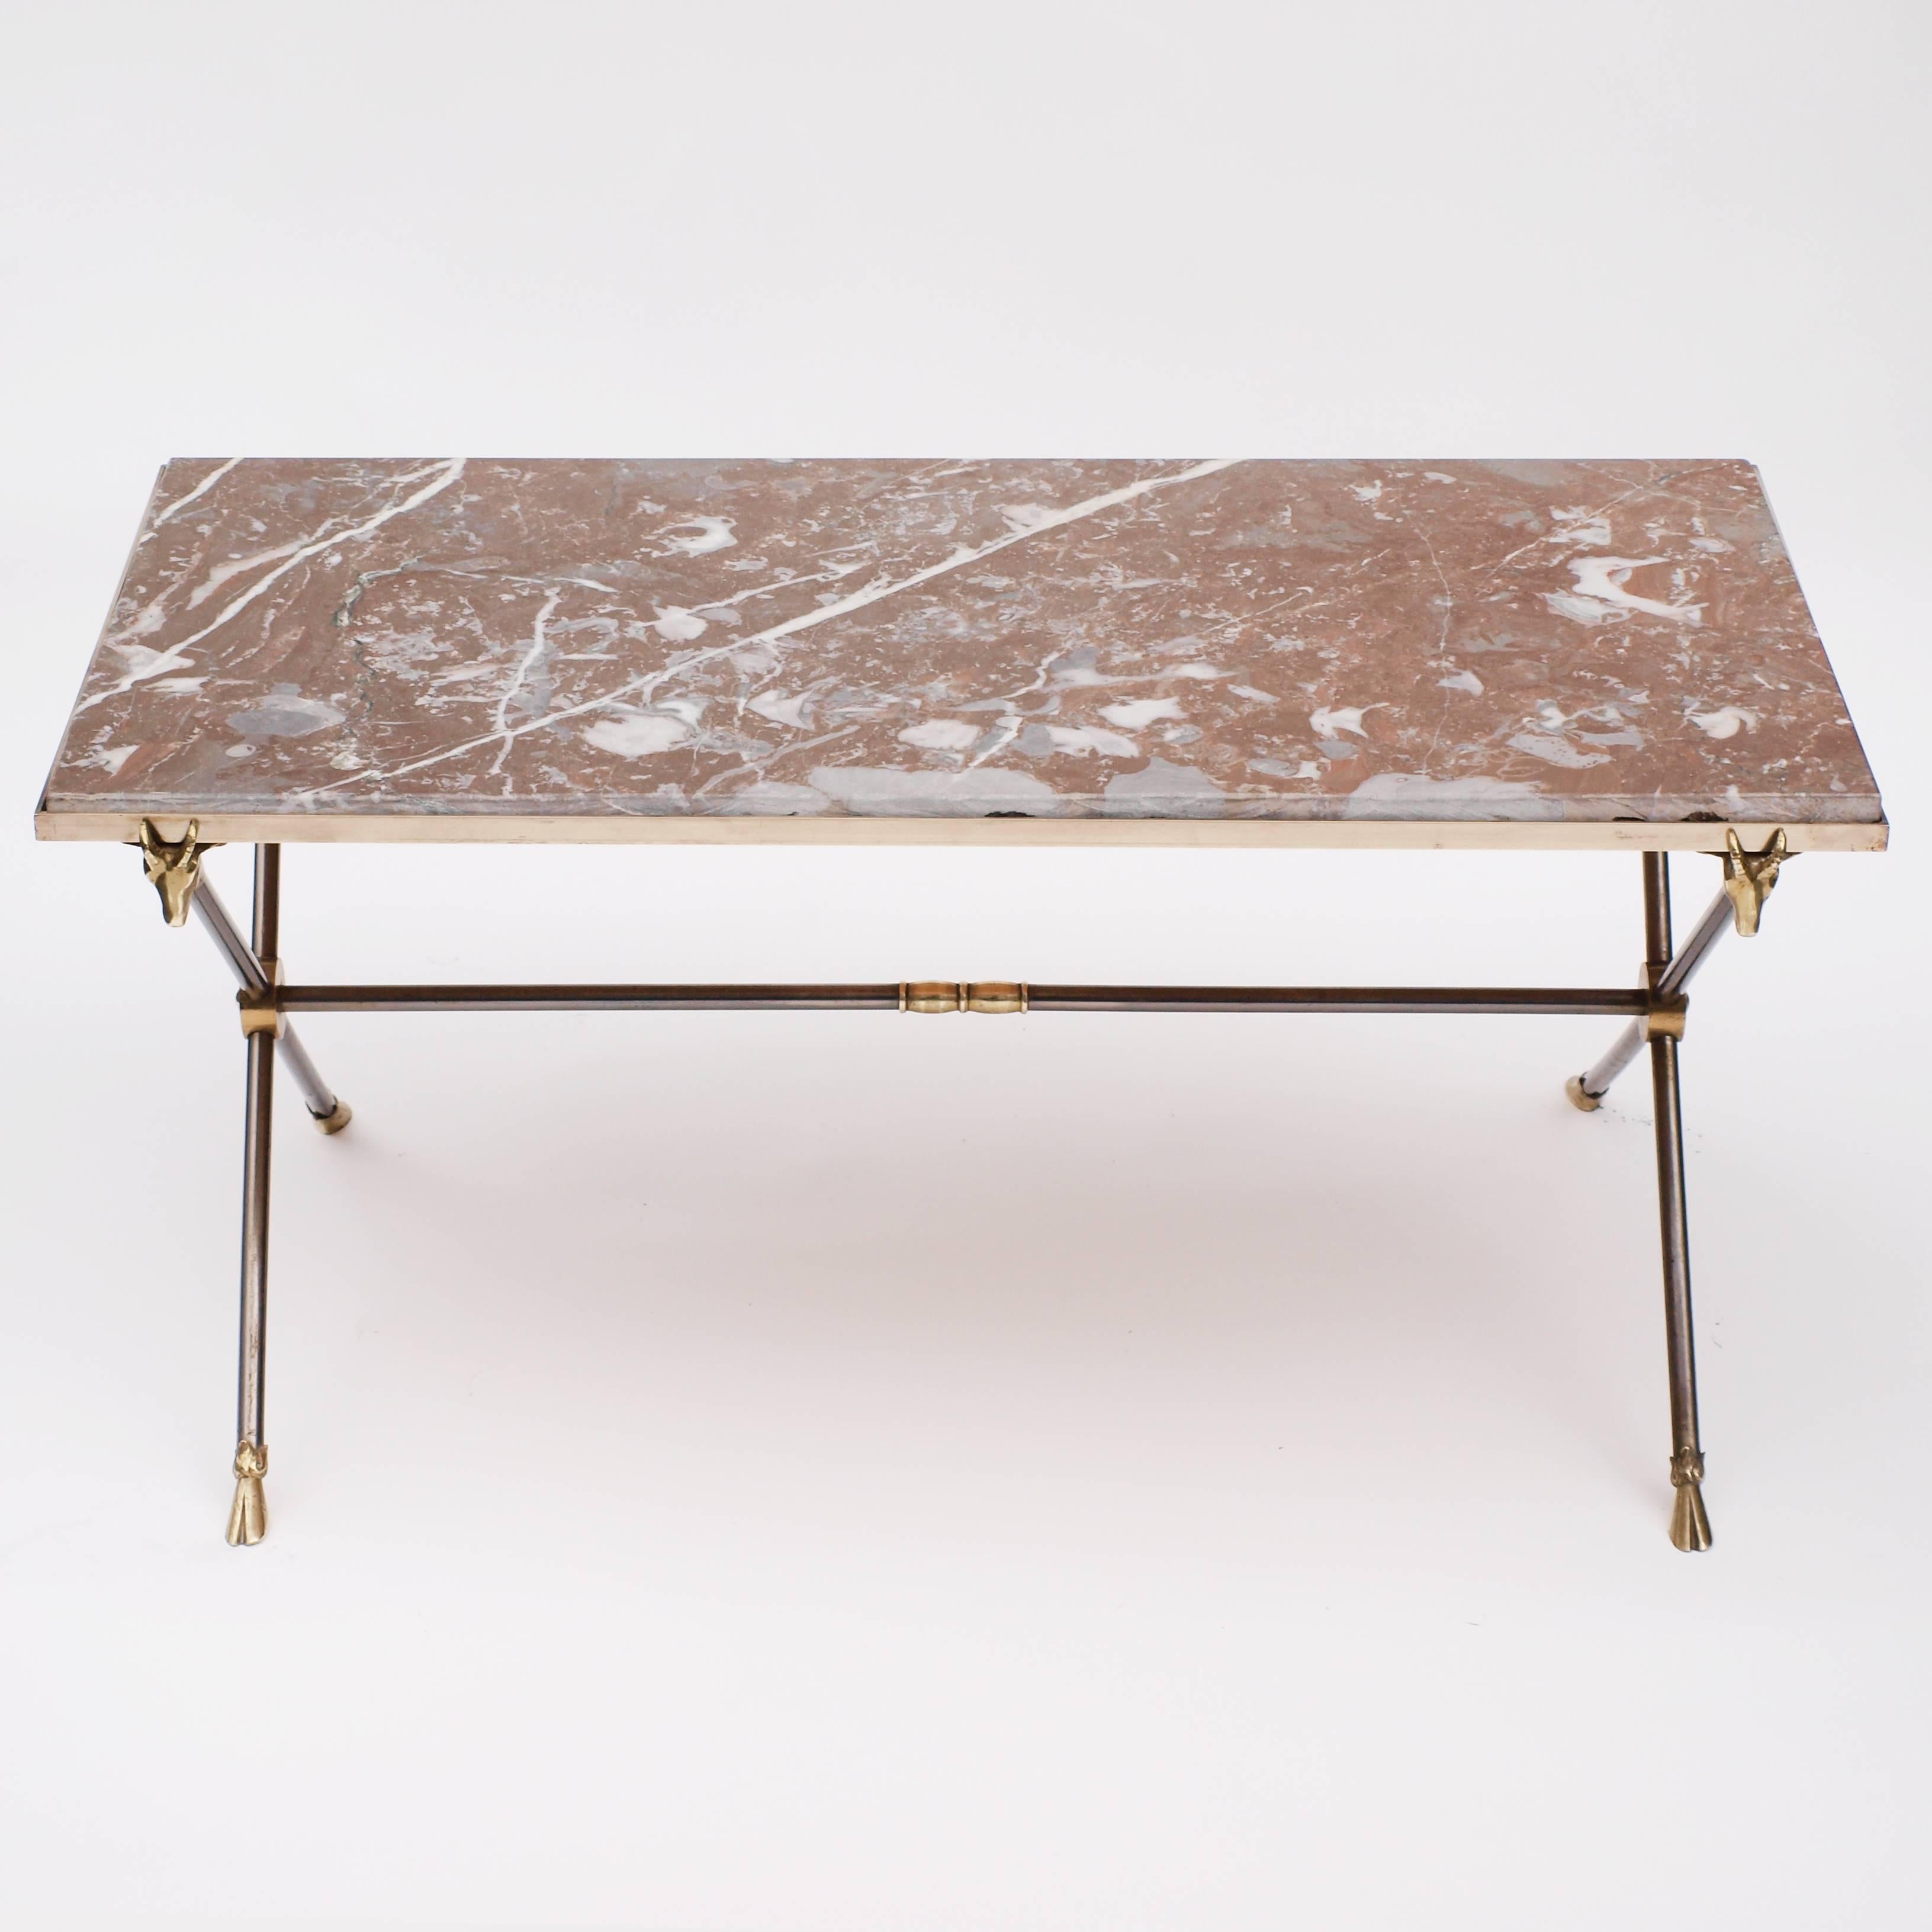 French Attributed to Maison Ramsay Rams Head Brass and  Nickel Coffee Table